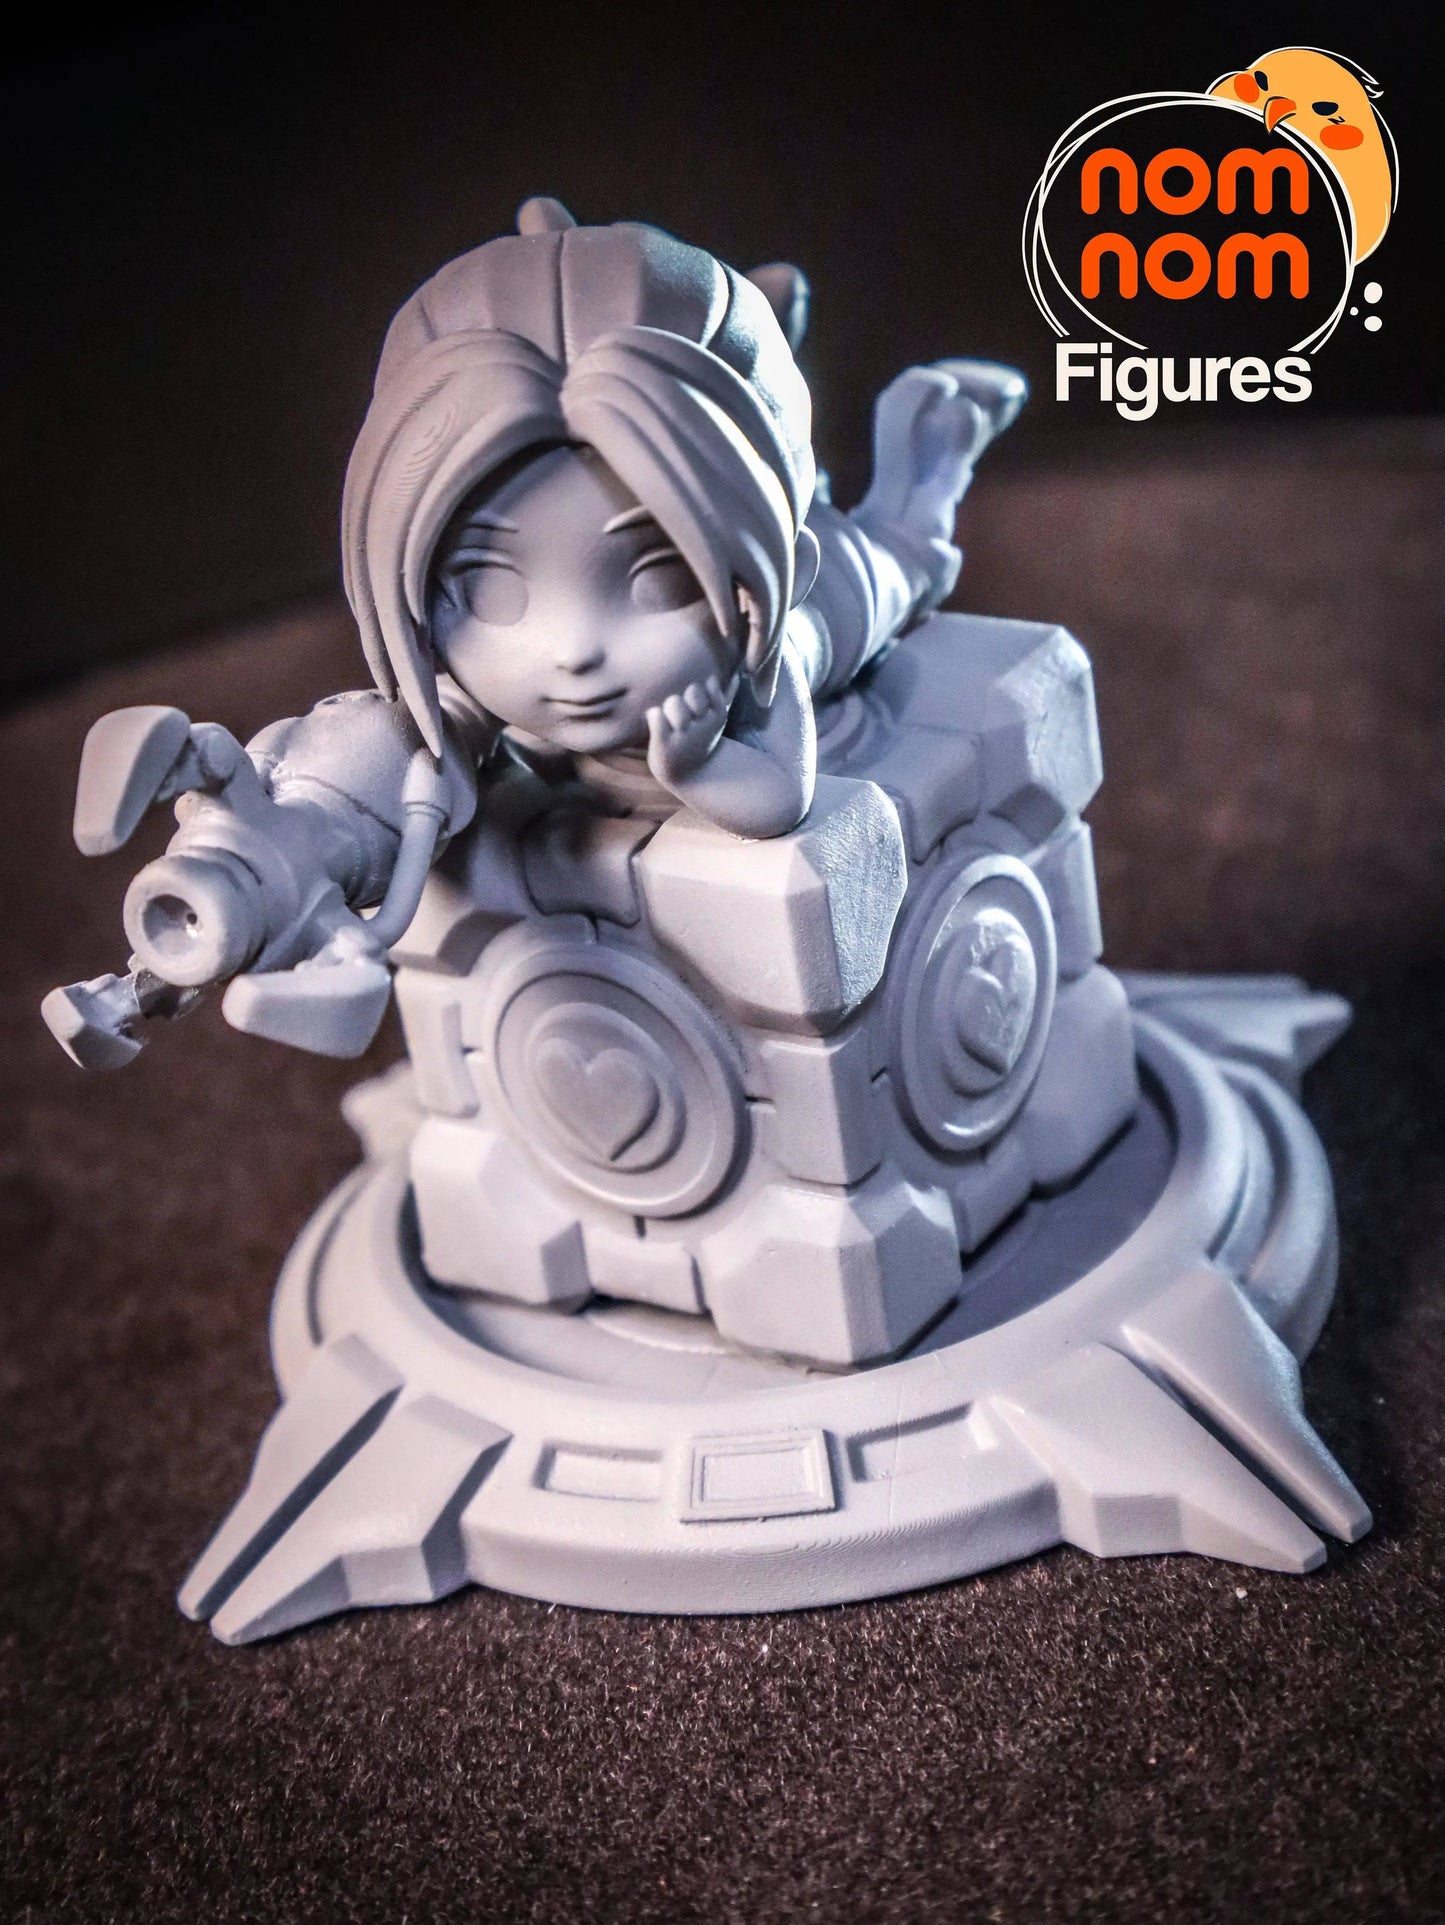 Cute and Capable Test Subject | Resin Garage Kit Sculpture Anime Video Game Fan Art Statue | Nomnom Figures - Tattles Told 3D